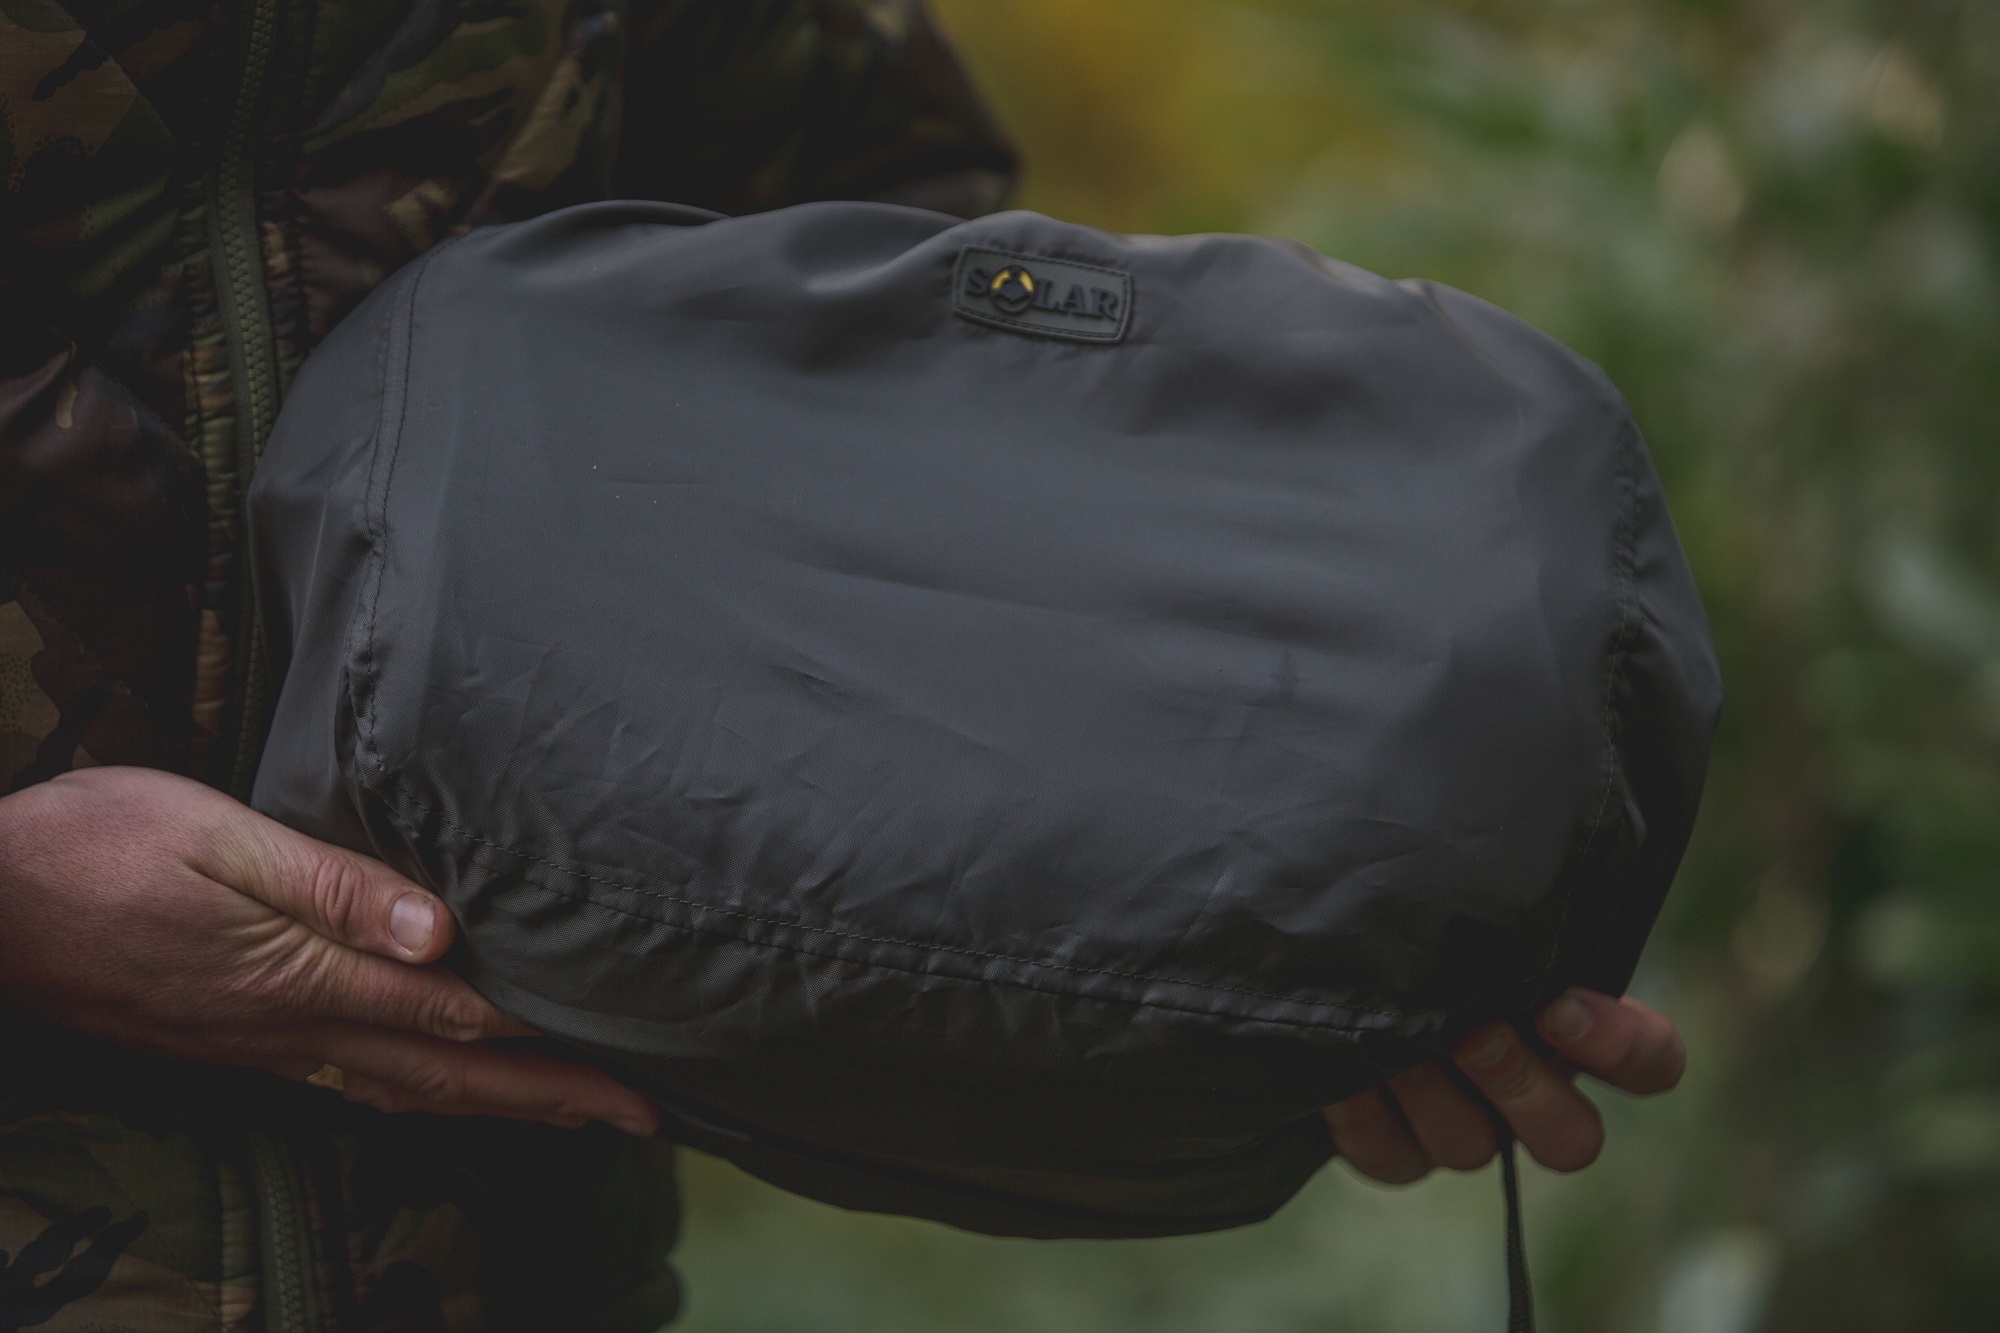 Solar SP Wide-Mouth Air-Dry Bag